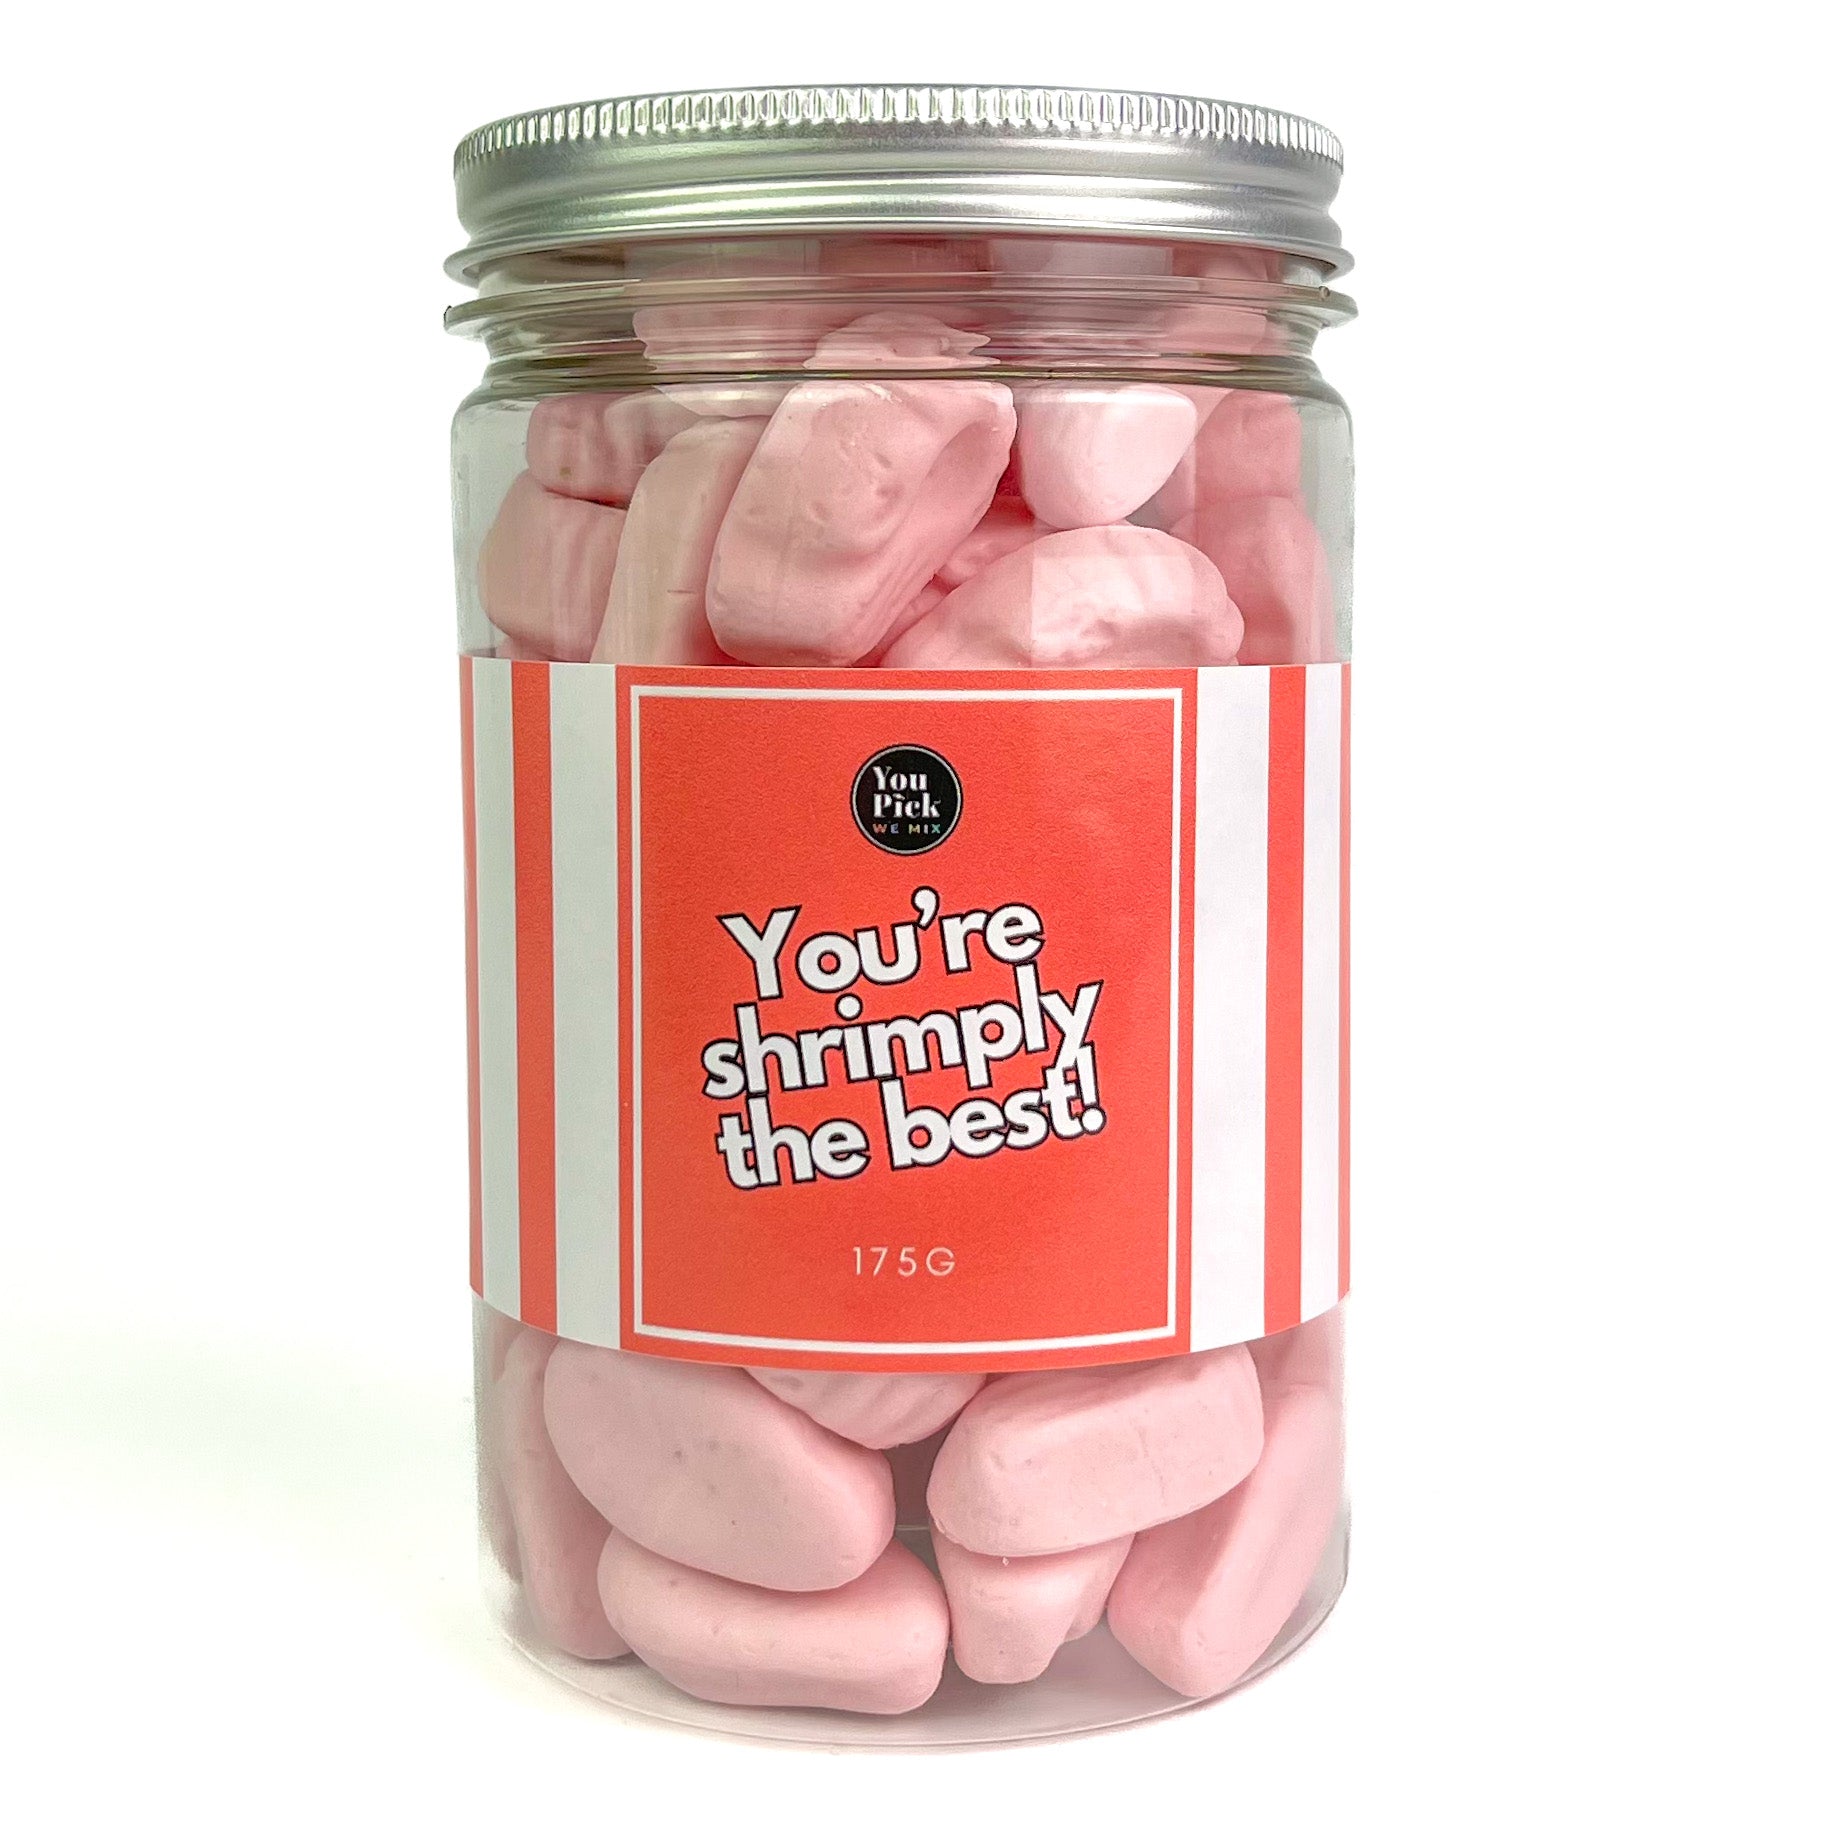 You're Shrimply the best! Jar